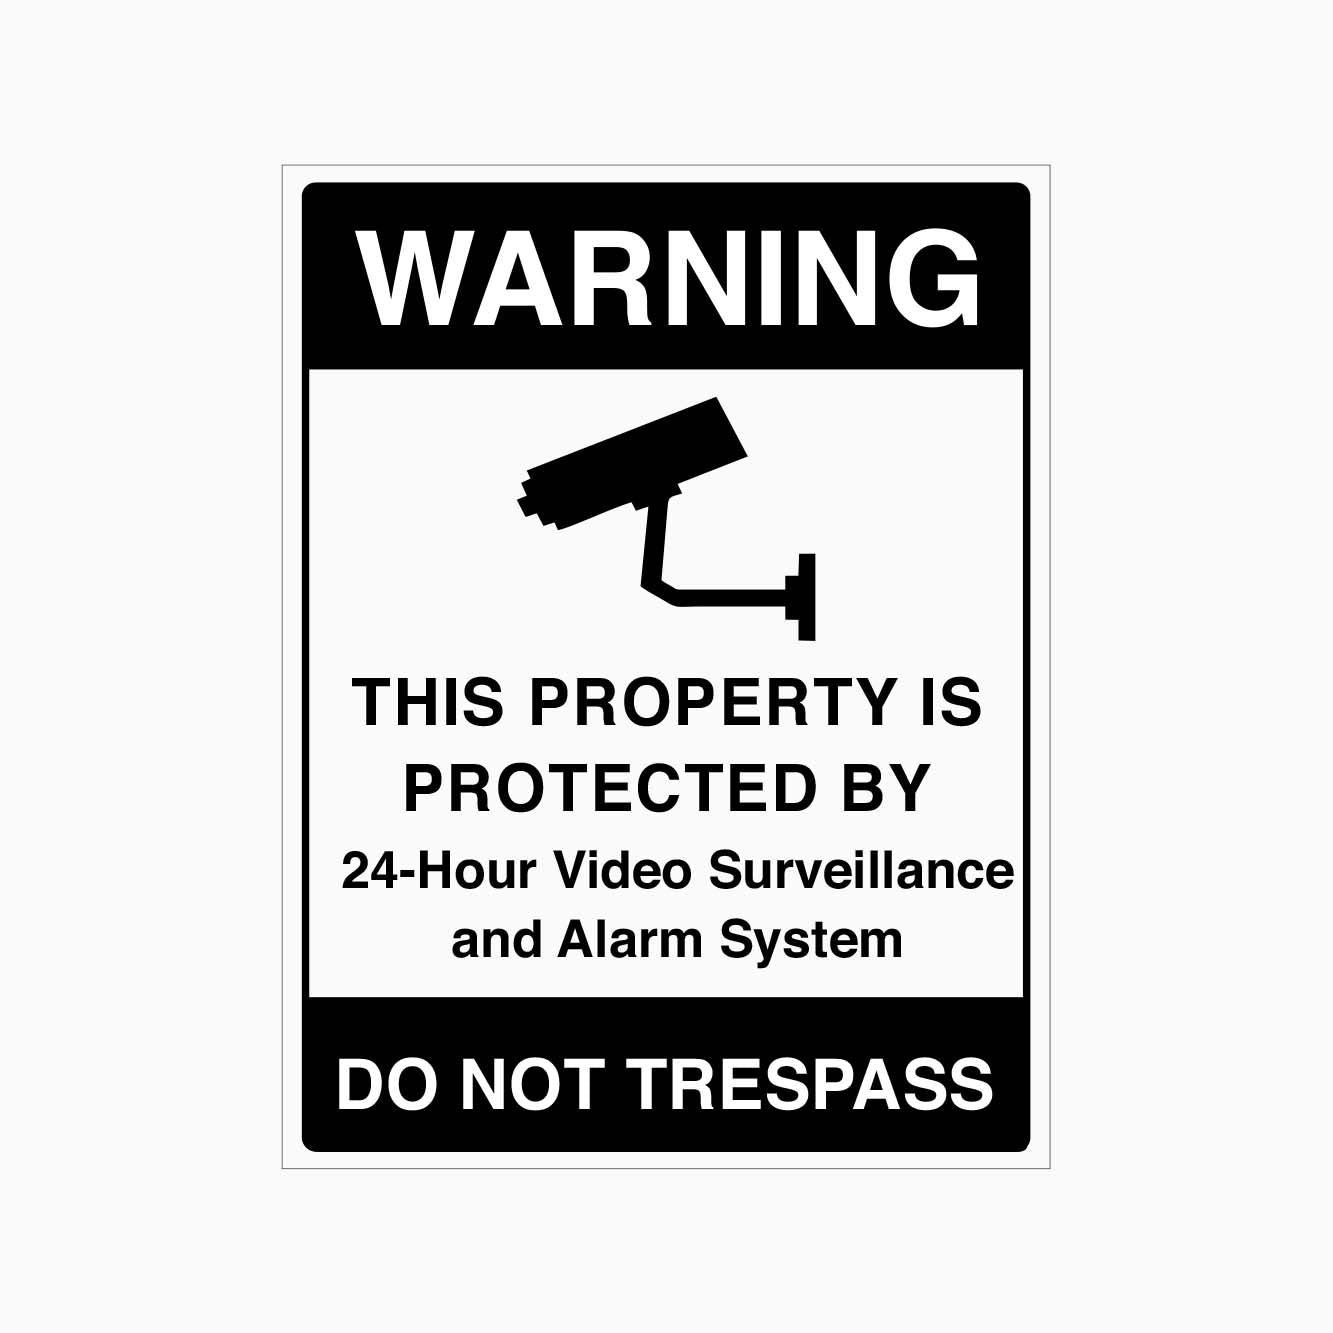 WARNING THIS PROPERTY IS PROTECTED  BY 24-HOUR VIDEO SURVEILLANCE AND ALARM SYSTEM DO NOT TRESPASS SIGN - GET SIGNSSIGN 